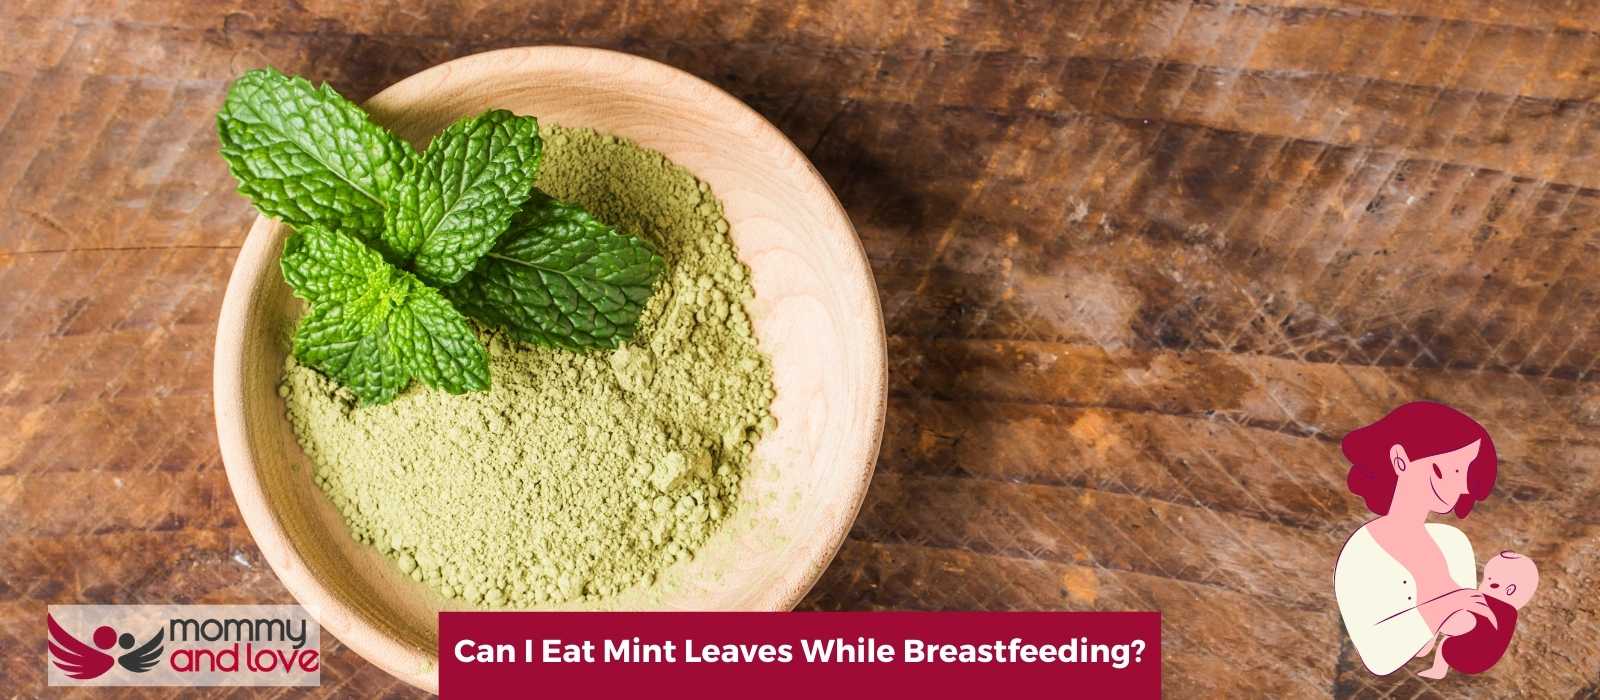 Can I Eat Mint Leaves While Breastfeeding